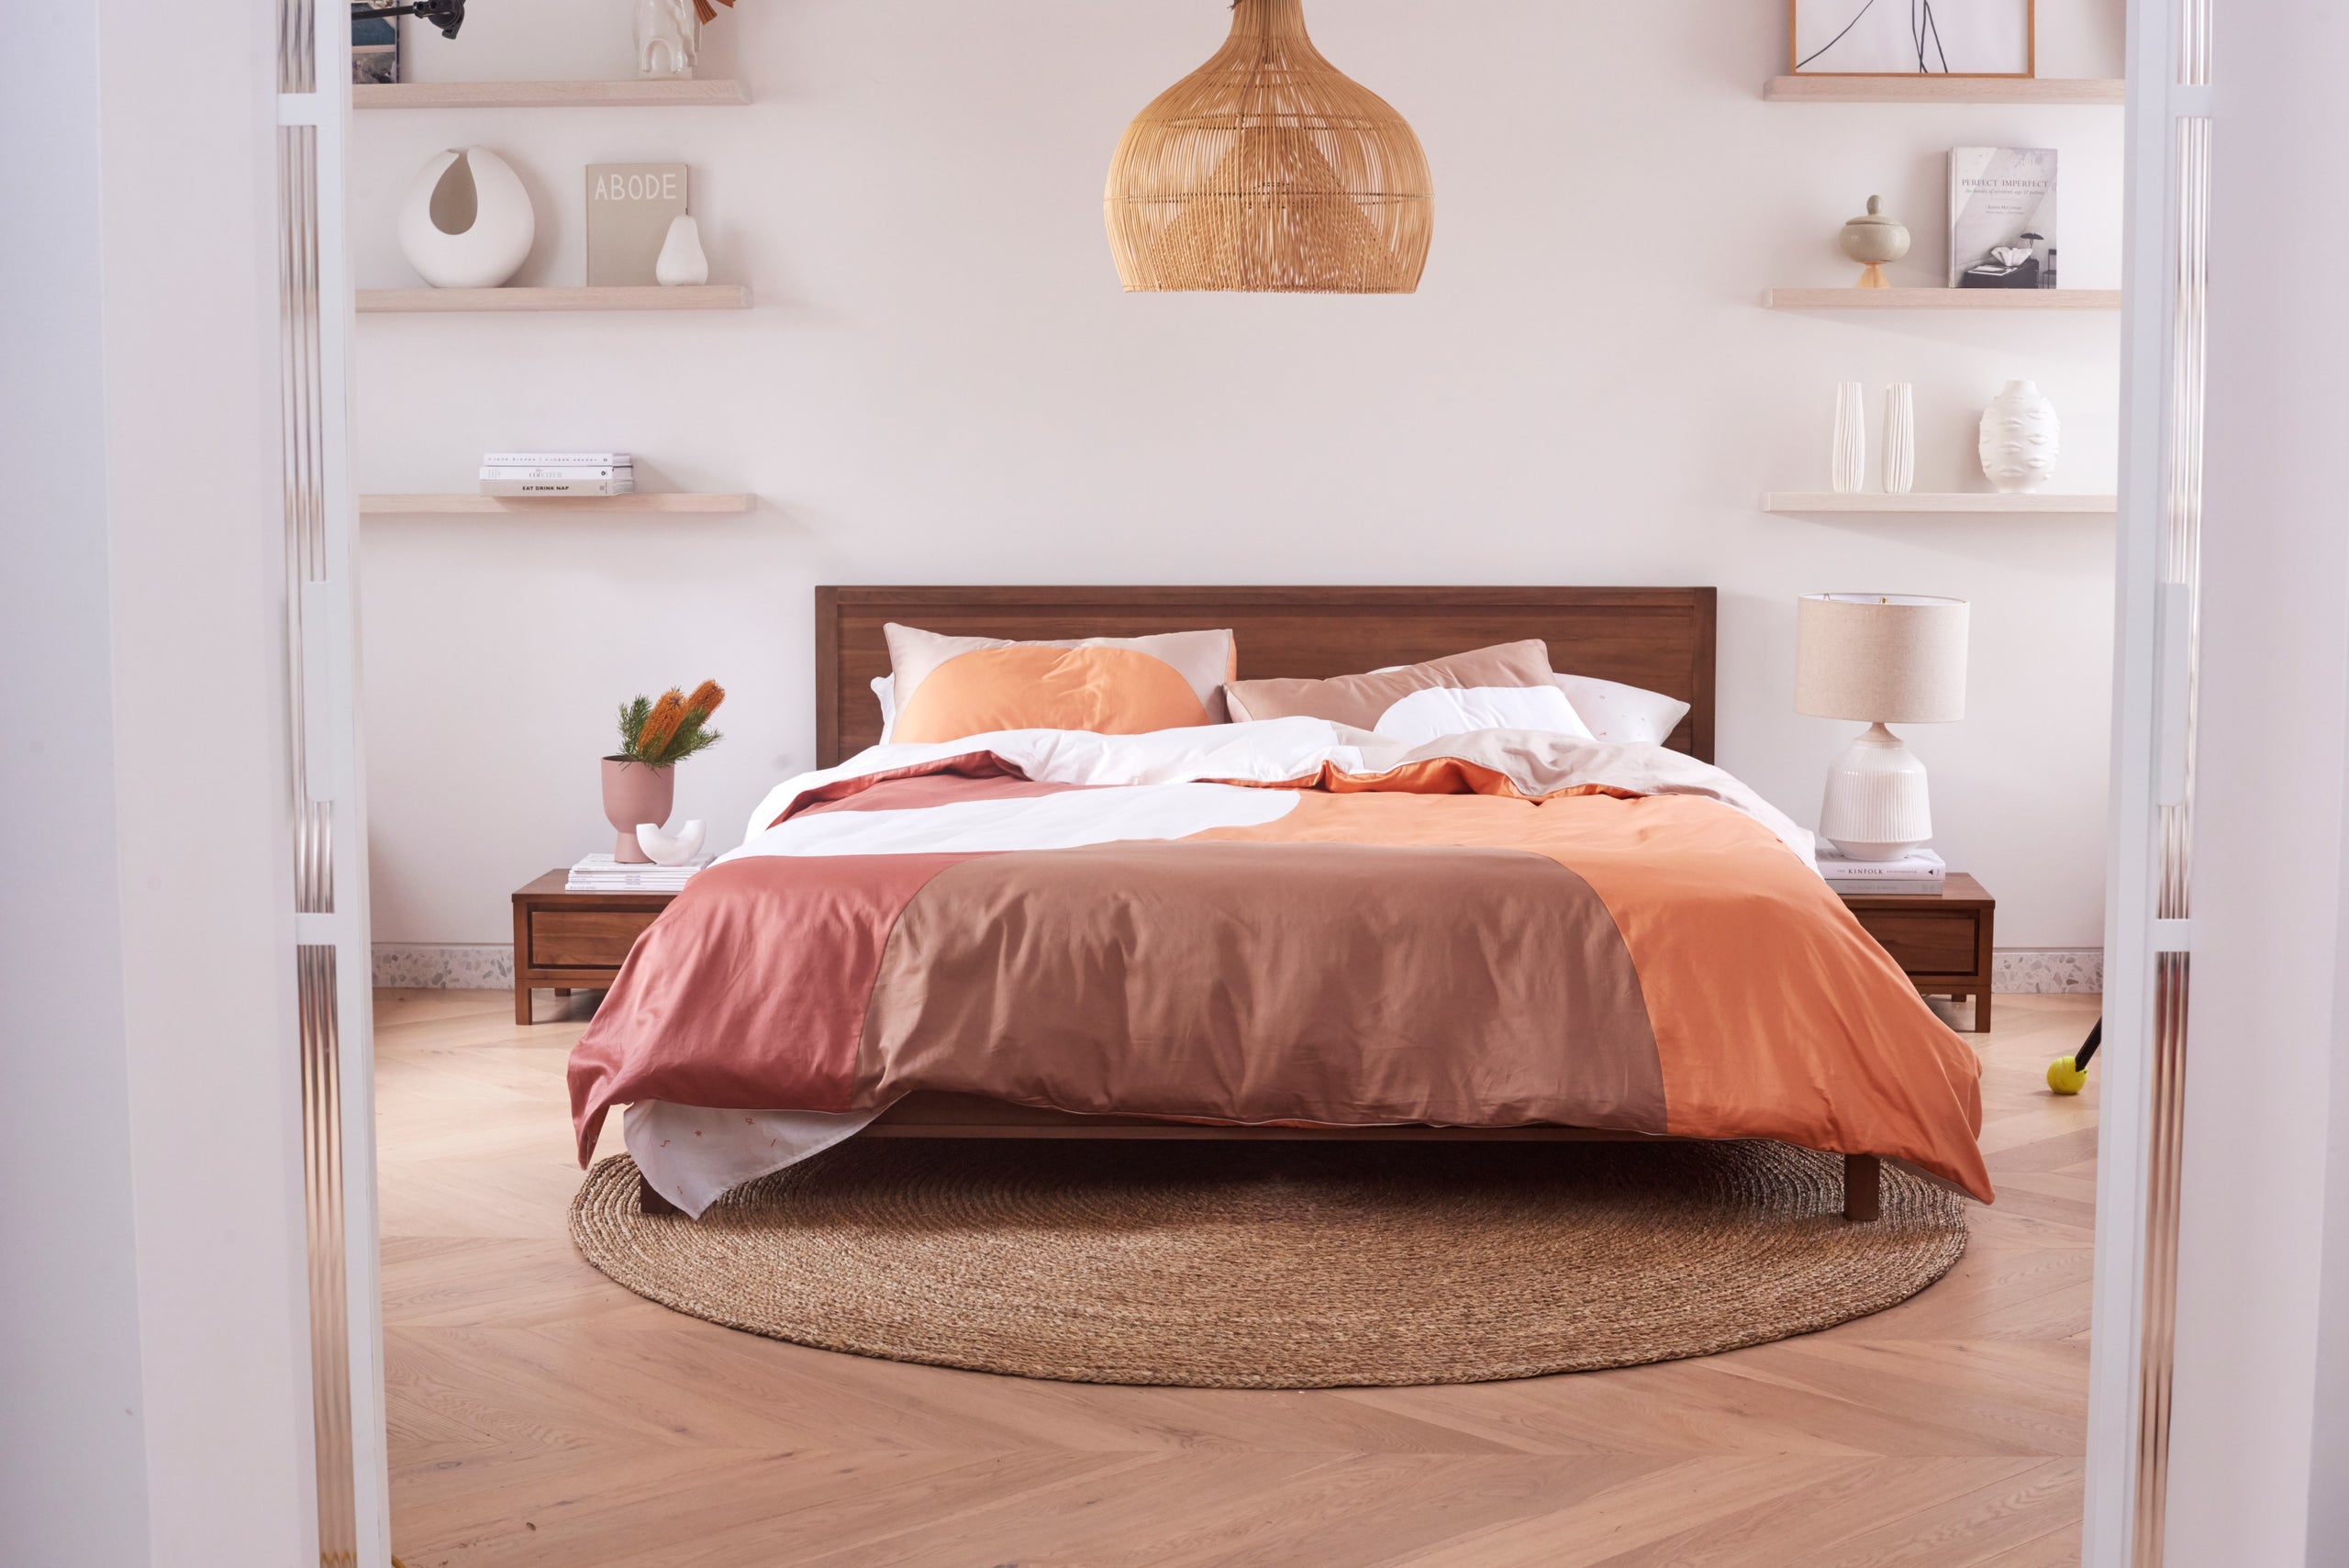 How to Style Your Bedroom Like an Interior stylist